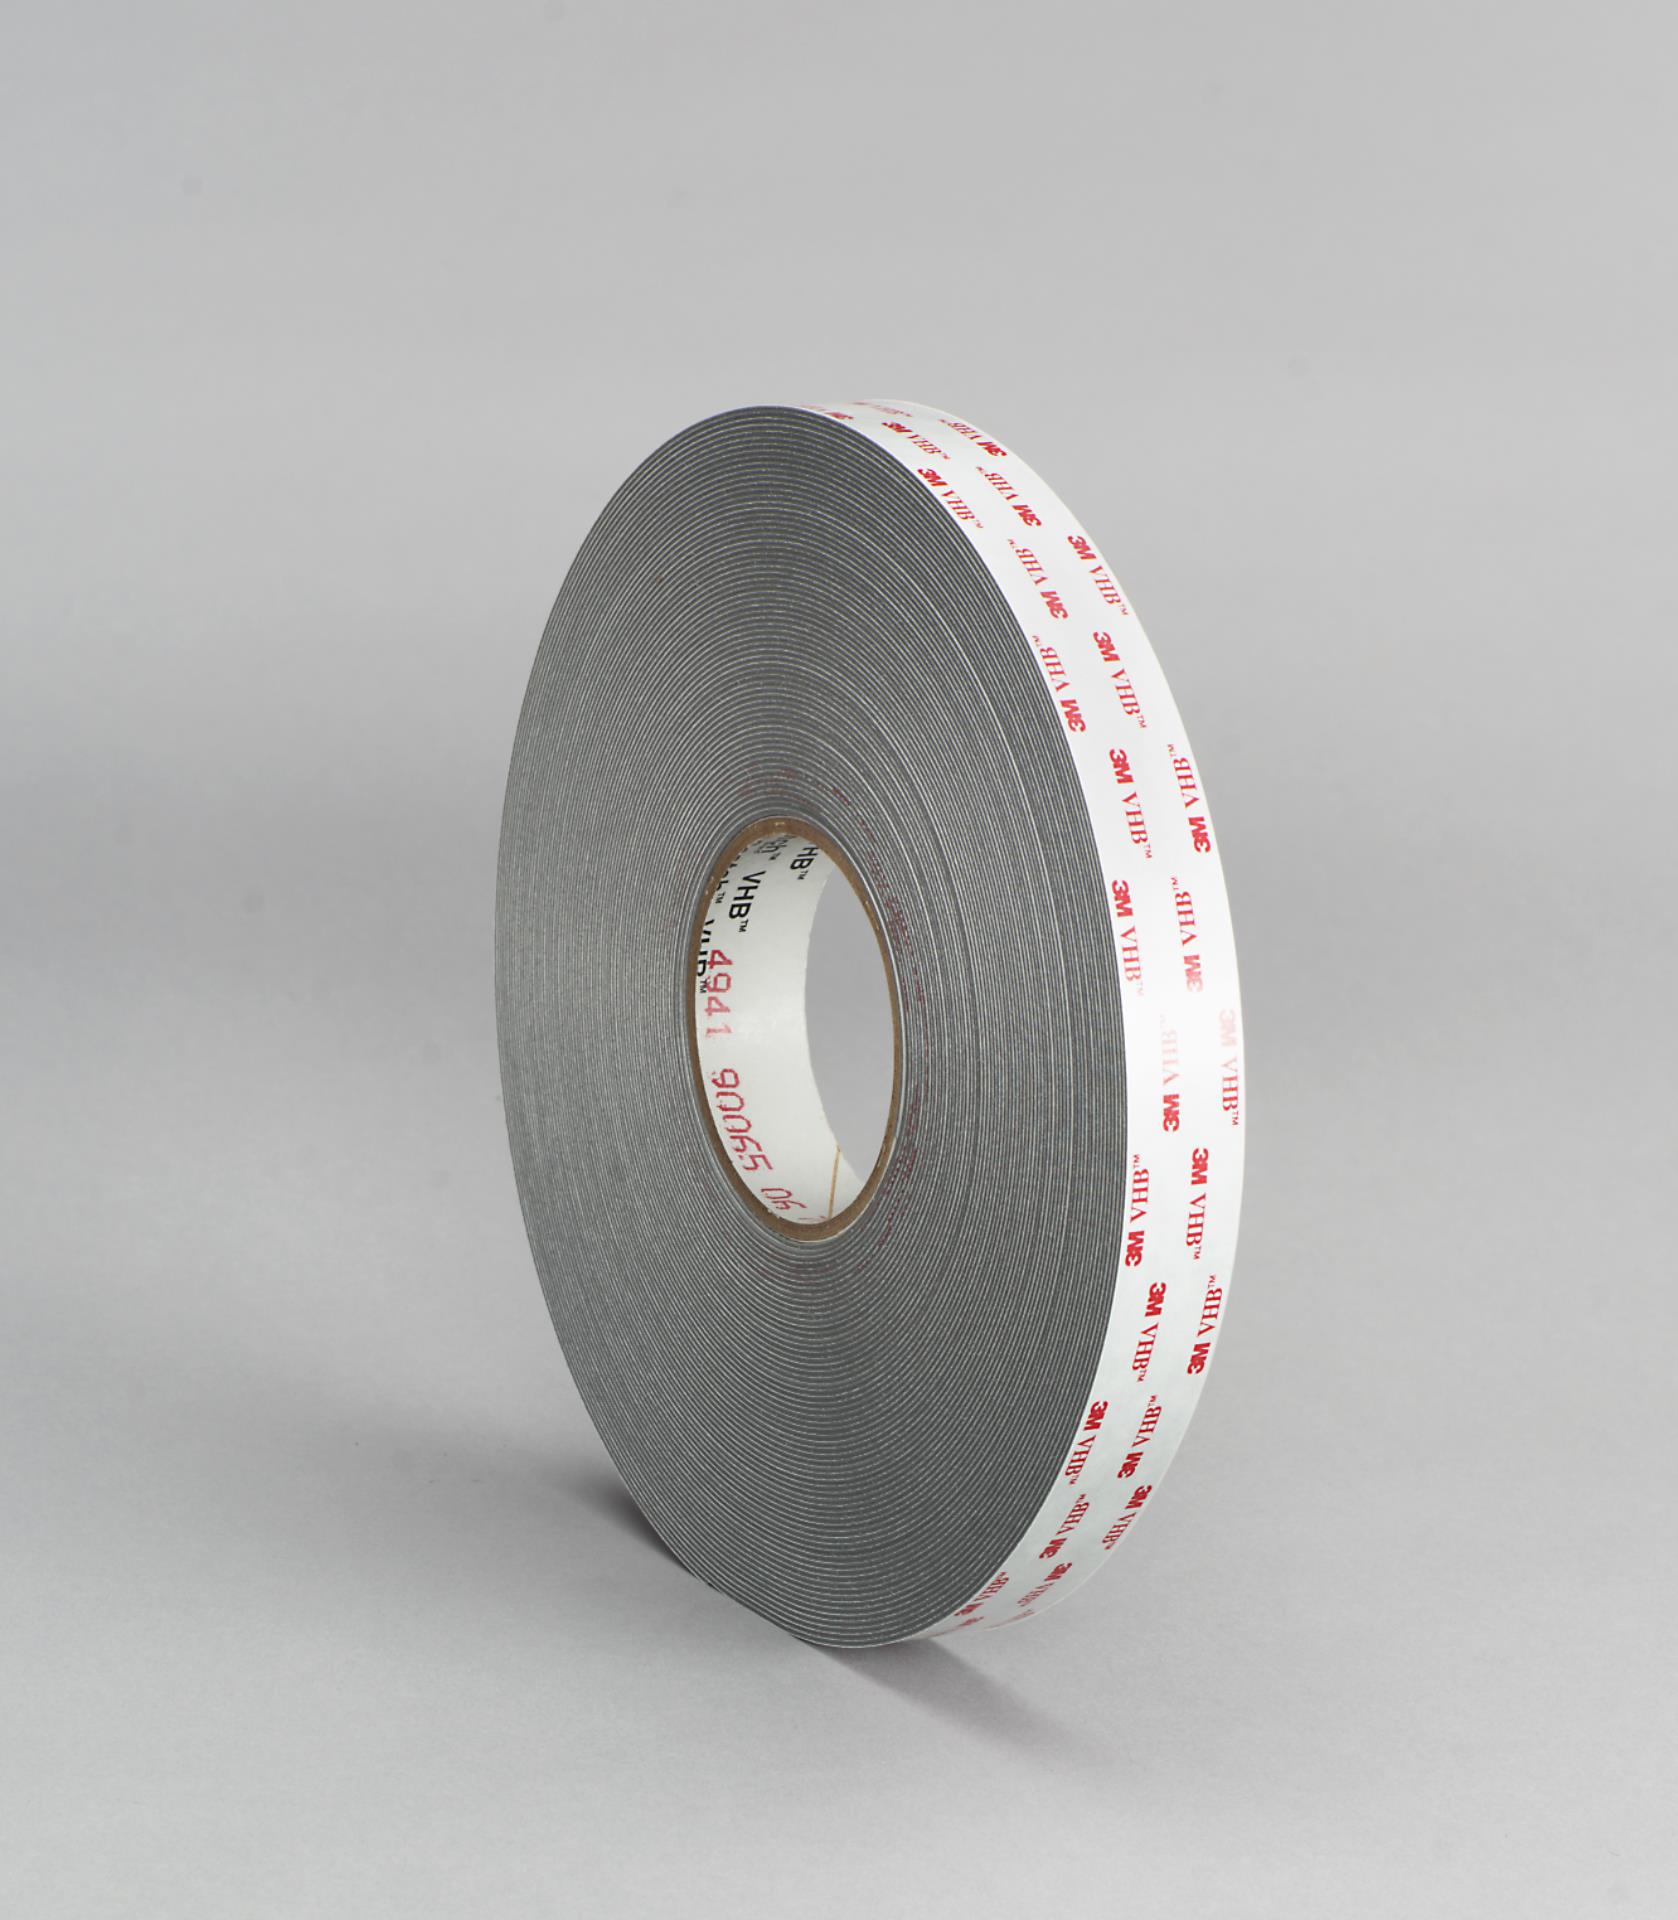 3M™ VHB™ Double Sided Tape Very Strong Adhesive Sticky Pads 19mm x 90mm 